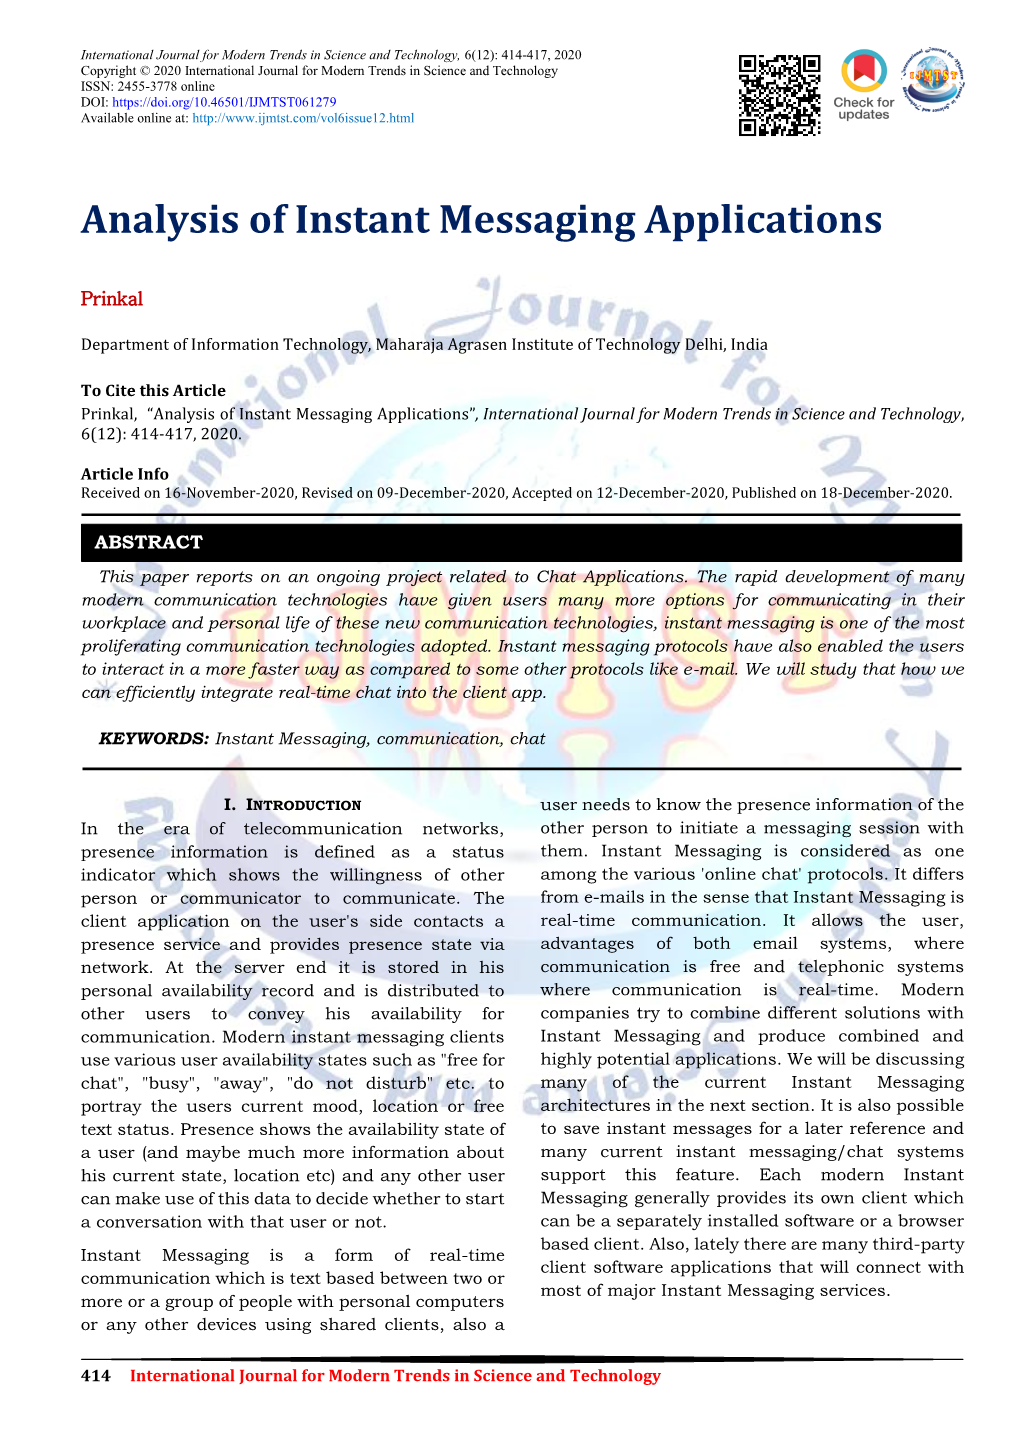 Analysis of Instant Messaging Applications